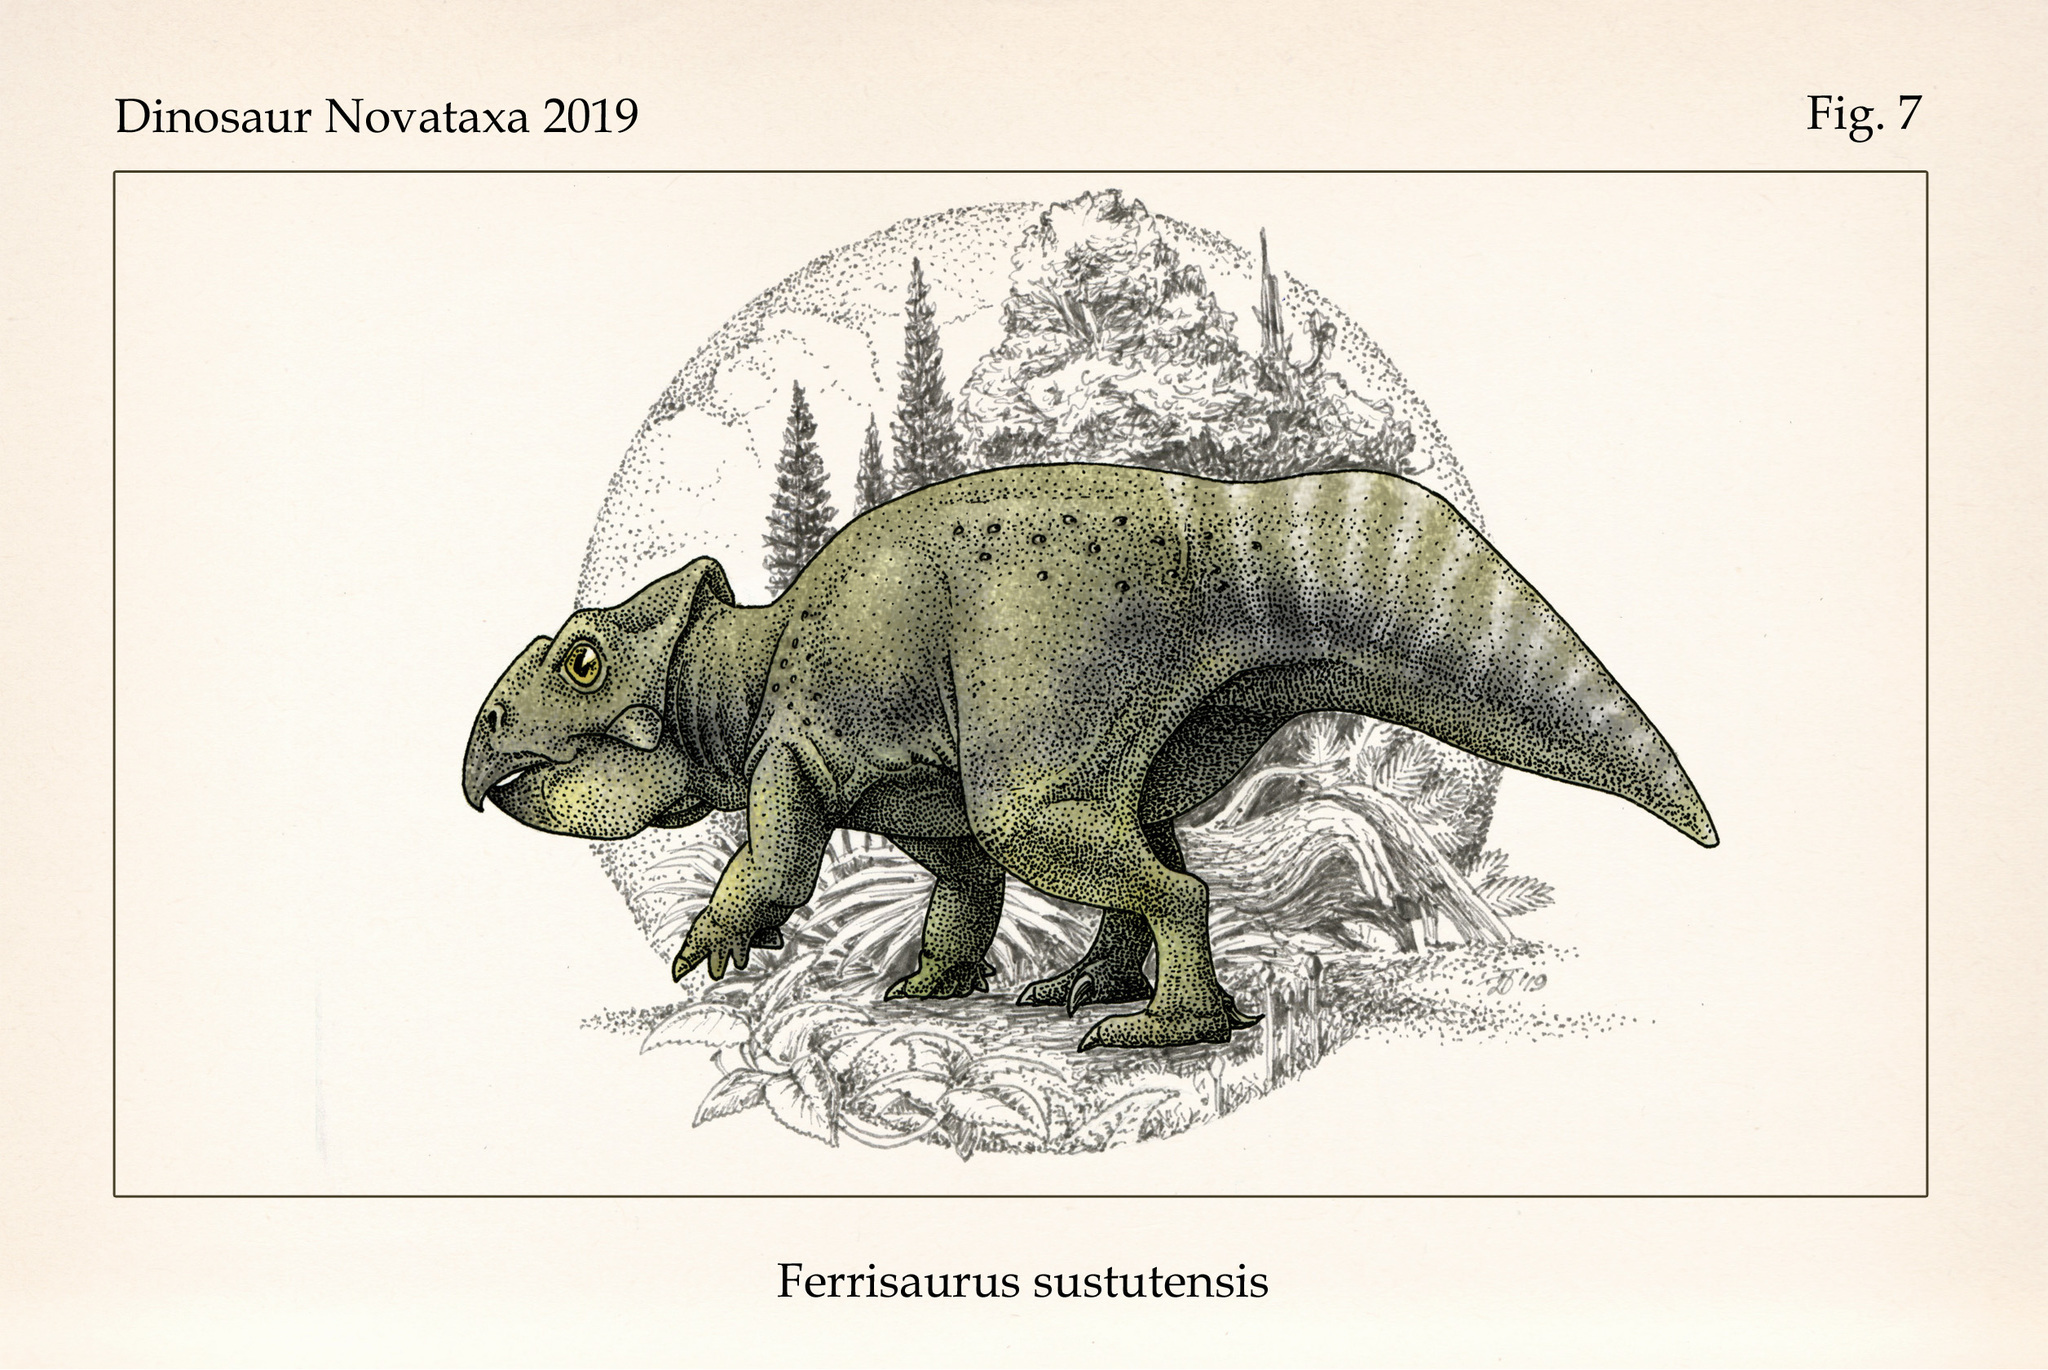 New Antiquities - dinosaurs discovered in 2019 (part 2) - My, Dinosaurs, Paleontology, Drawing, Pen drawing, The science, Longpost